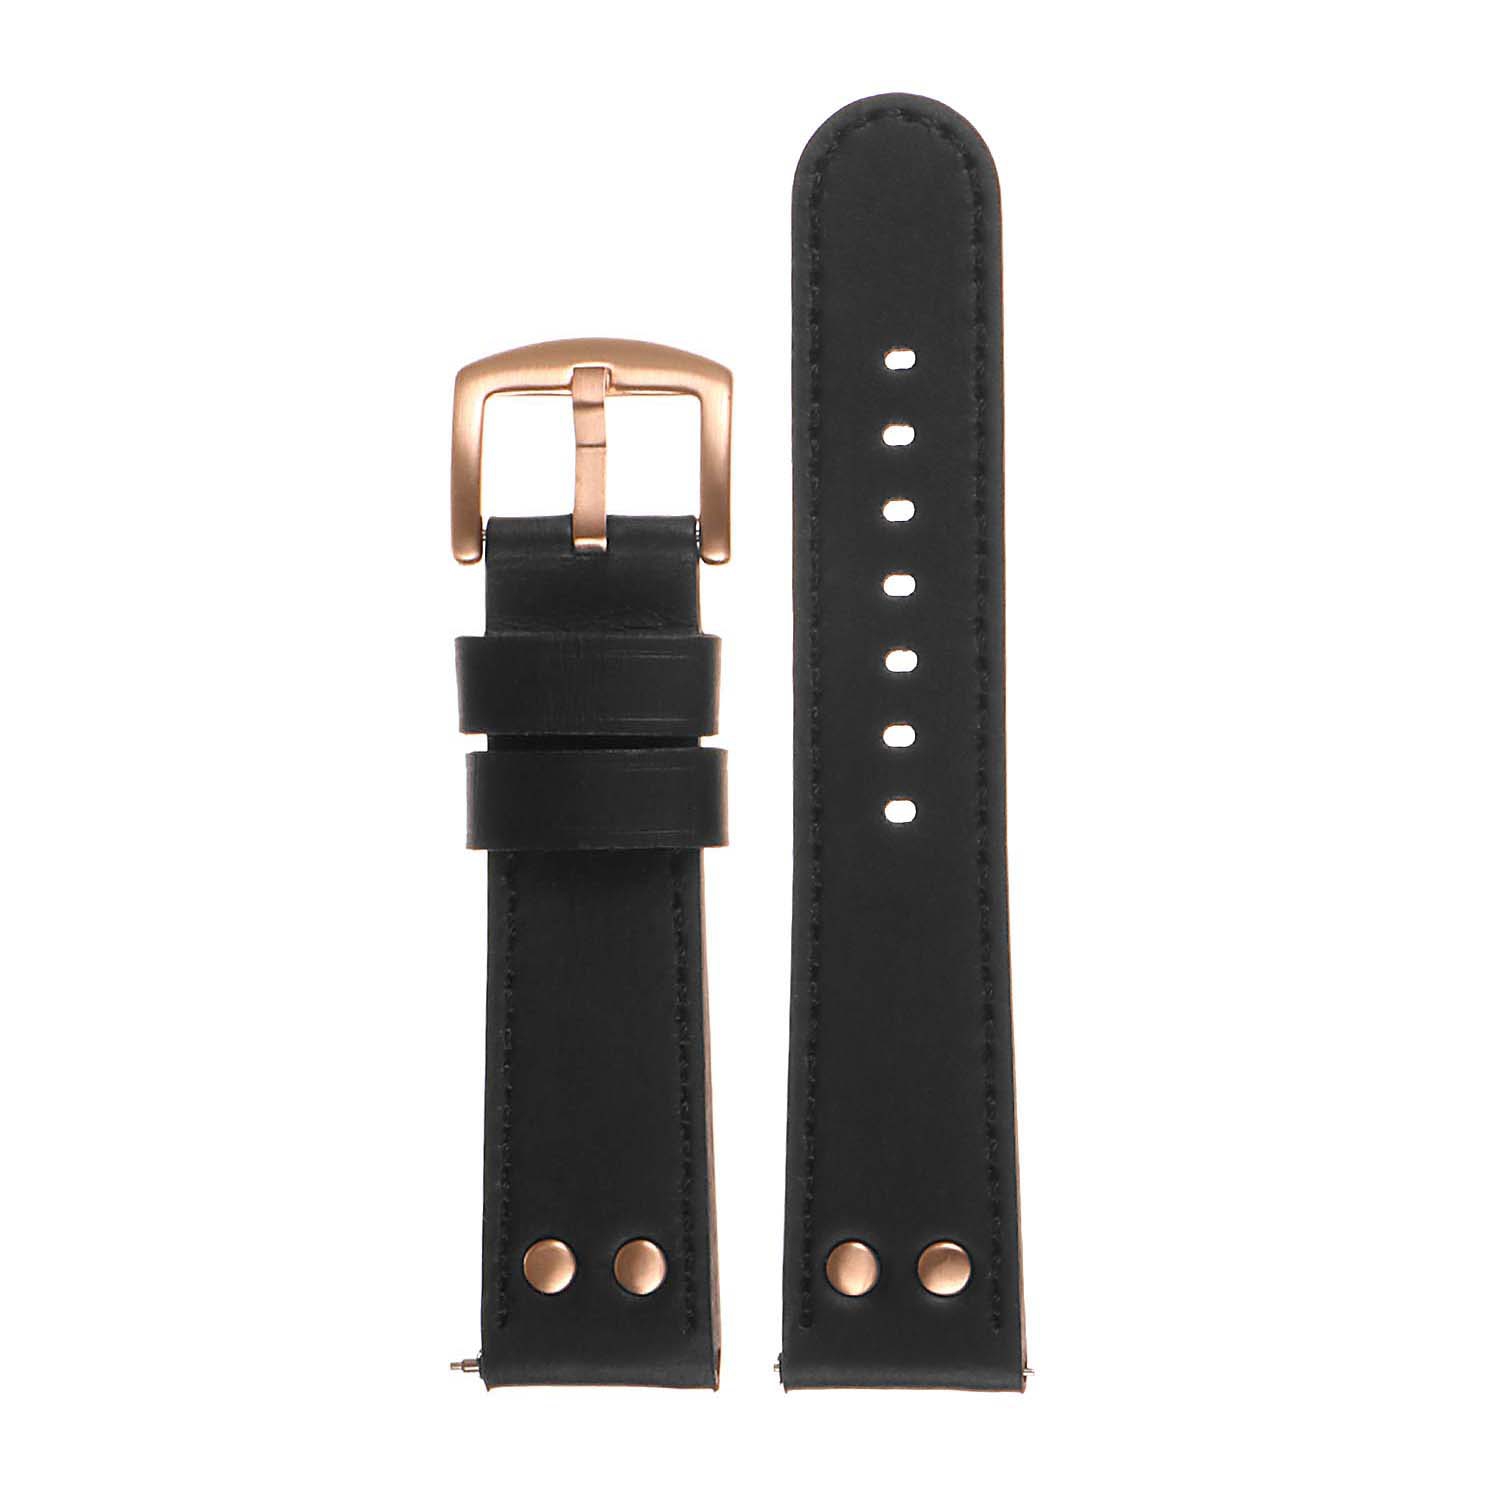 DASSARI Leather Pilot 22mm Watch Band Strap for LG G Watch W100 - Black (Rose Gold Buckle)